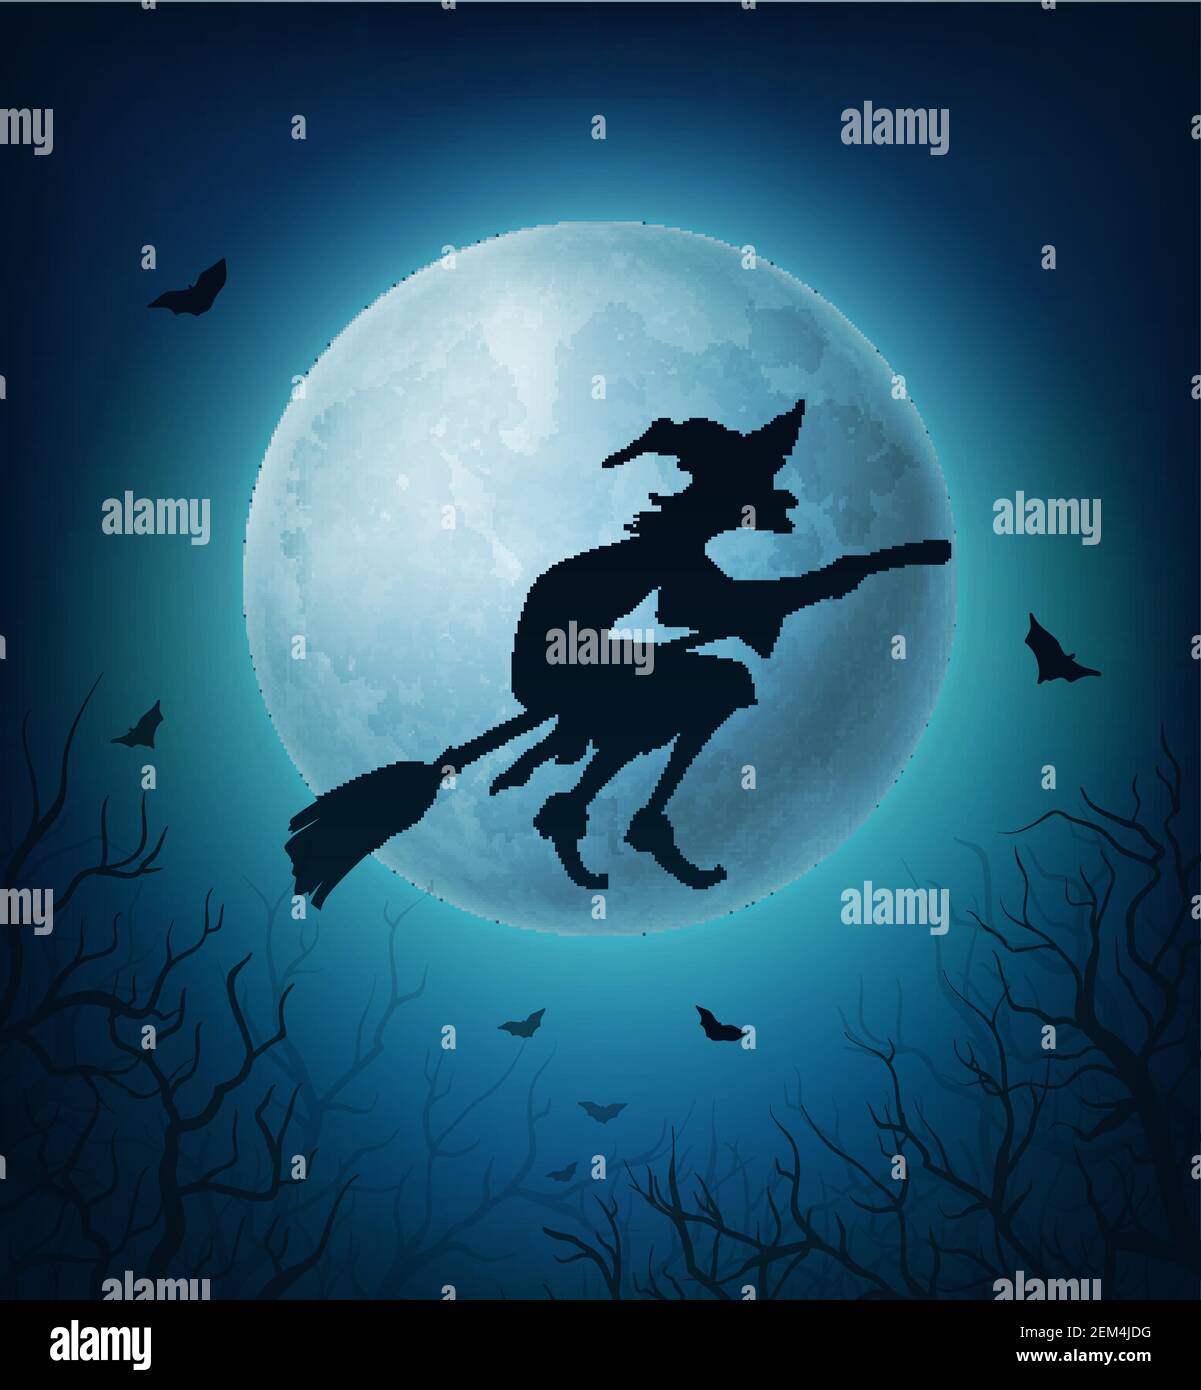 Witch flying on broom in Halloween horror night sky. Black silhouette of evil woman on broomstick against full moon, bats and spooky tree branches. Ha Stock Vector